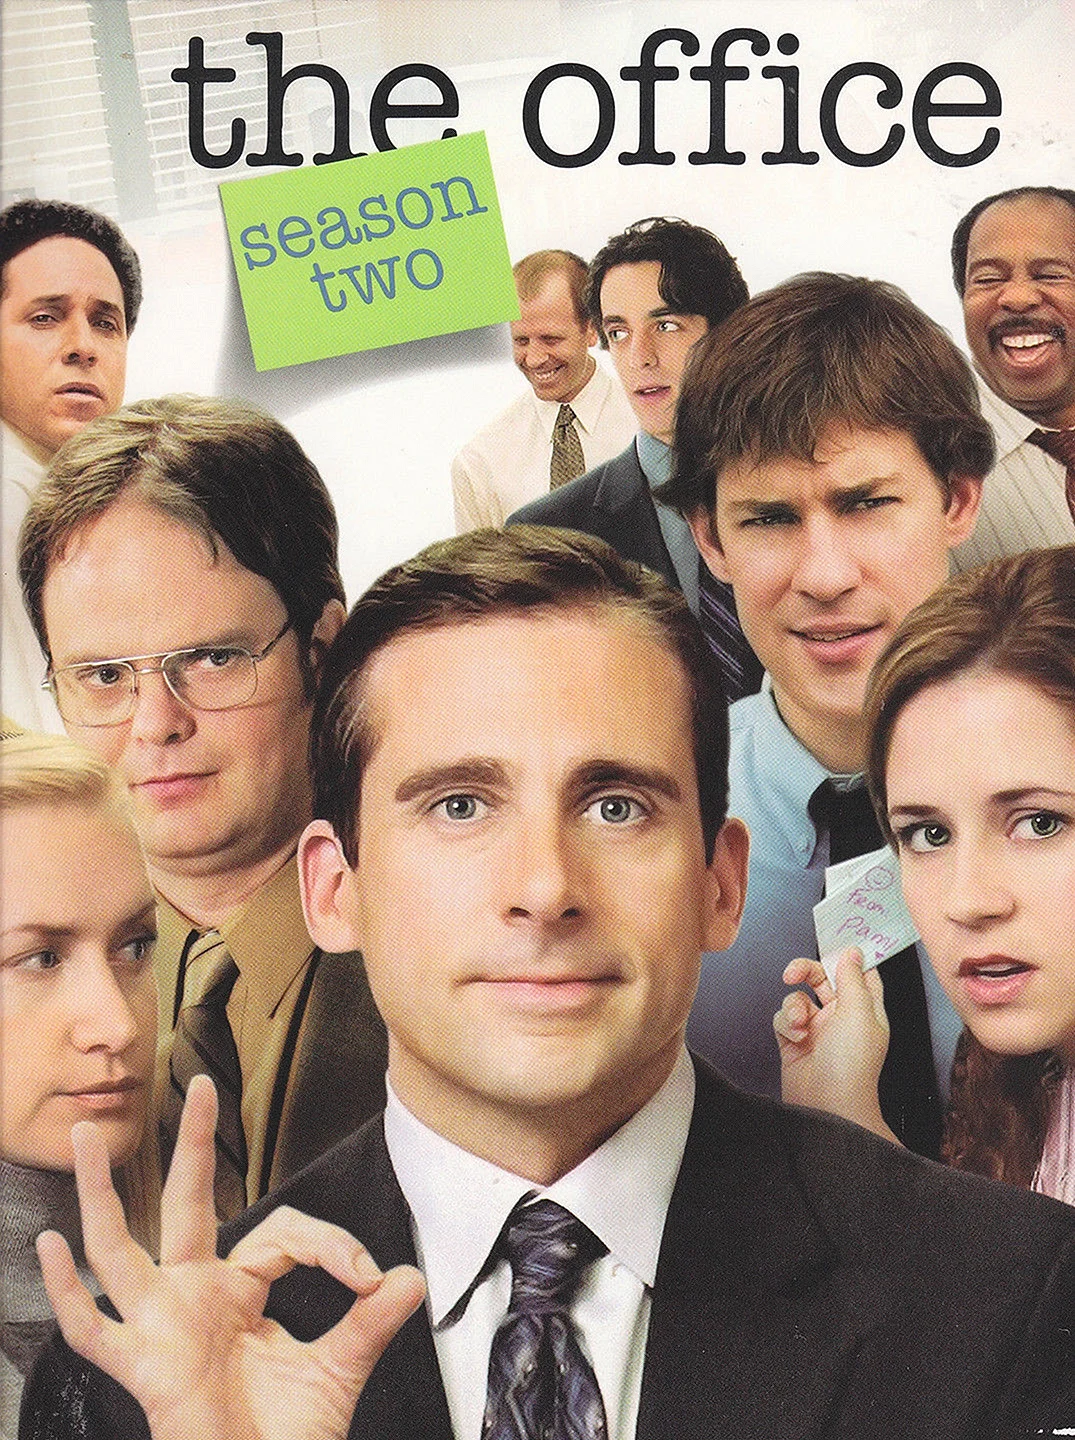 The Office Season 2 Wallpaper For iPhone